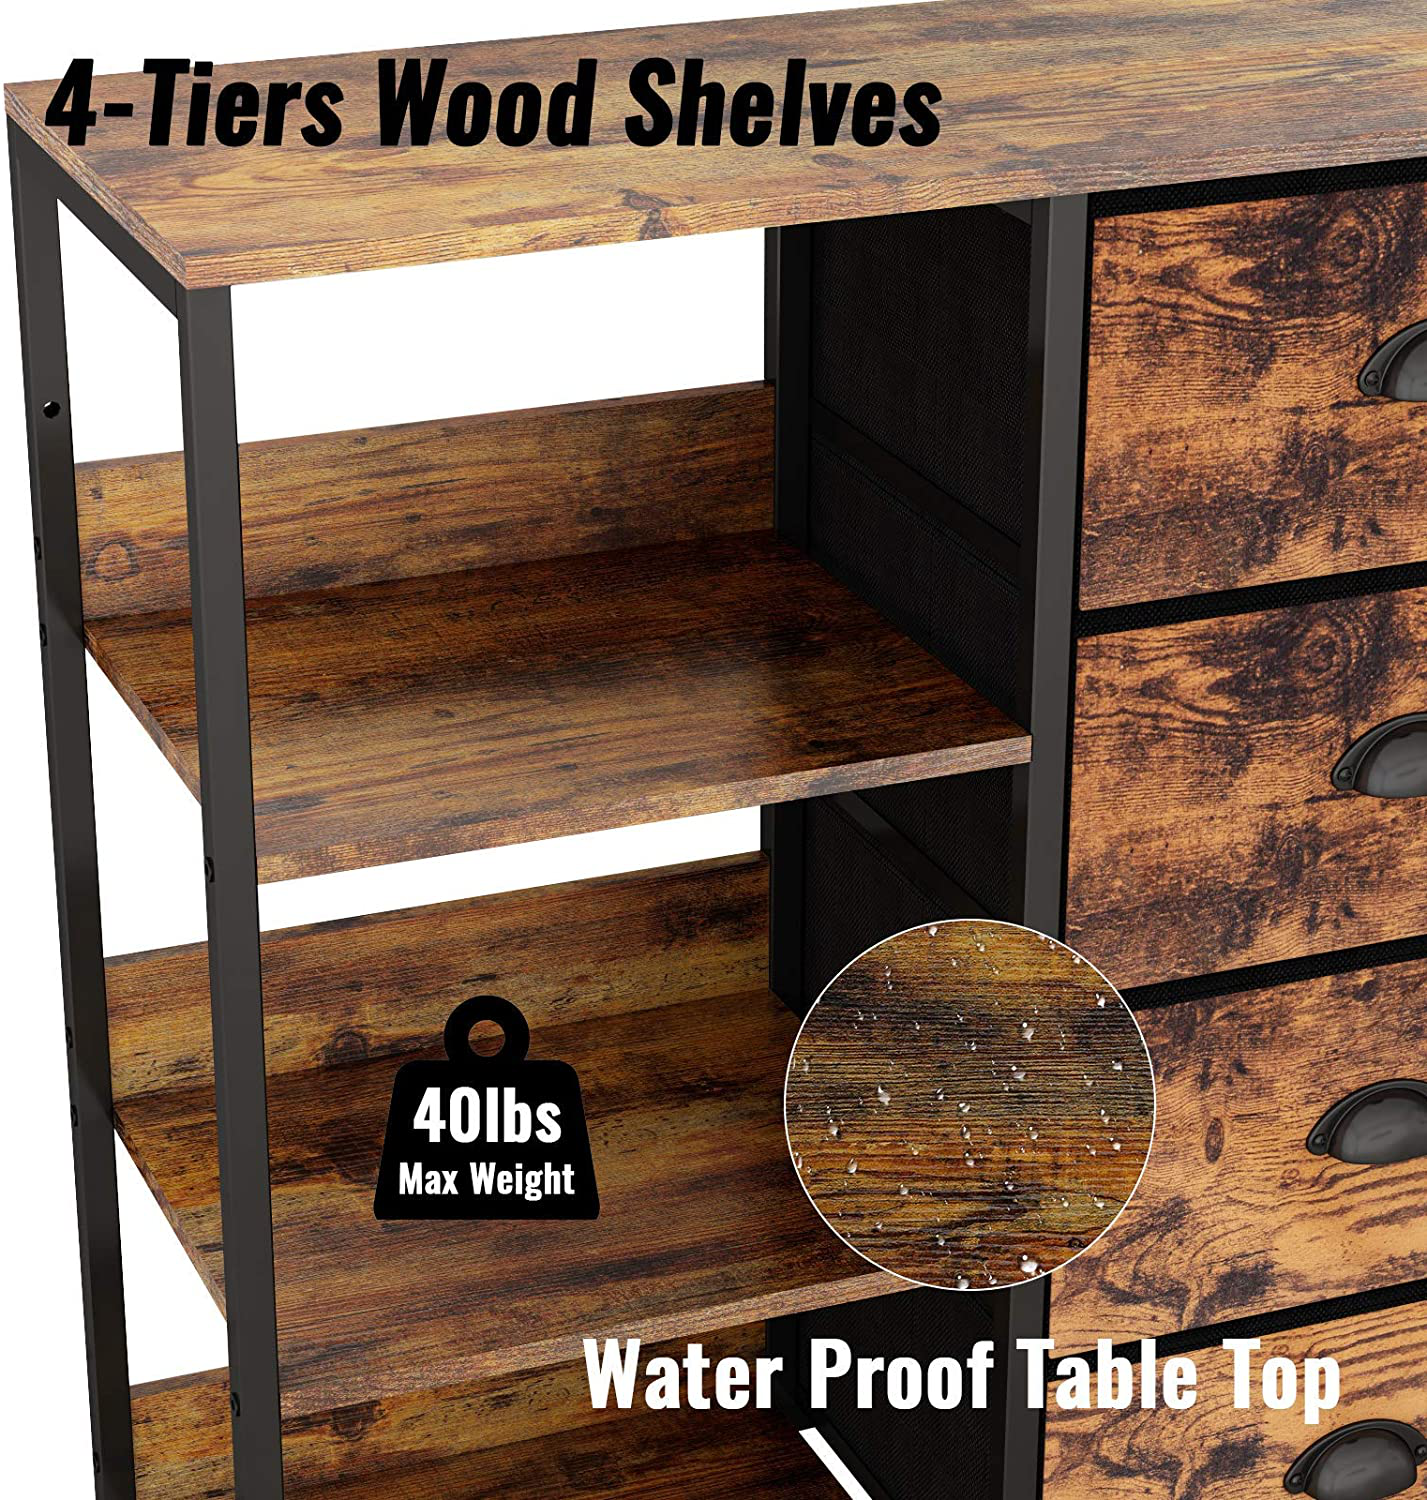 4-Tier Drawer Dresser for Bedroom, Clothes Organizer, Fabric